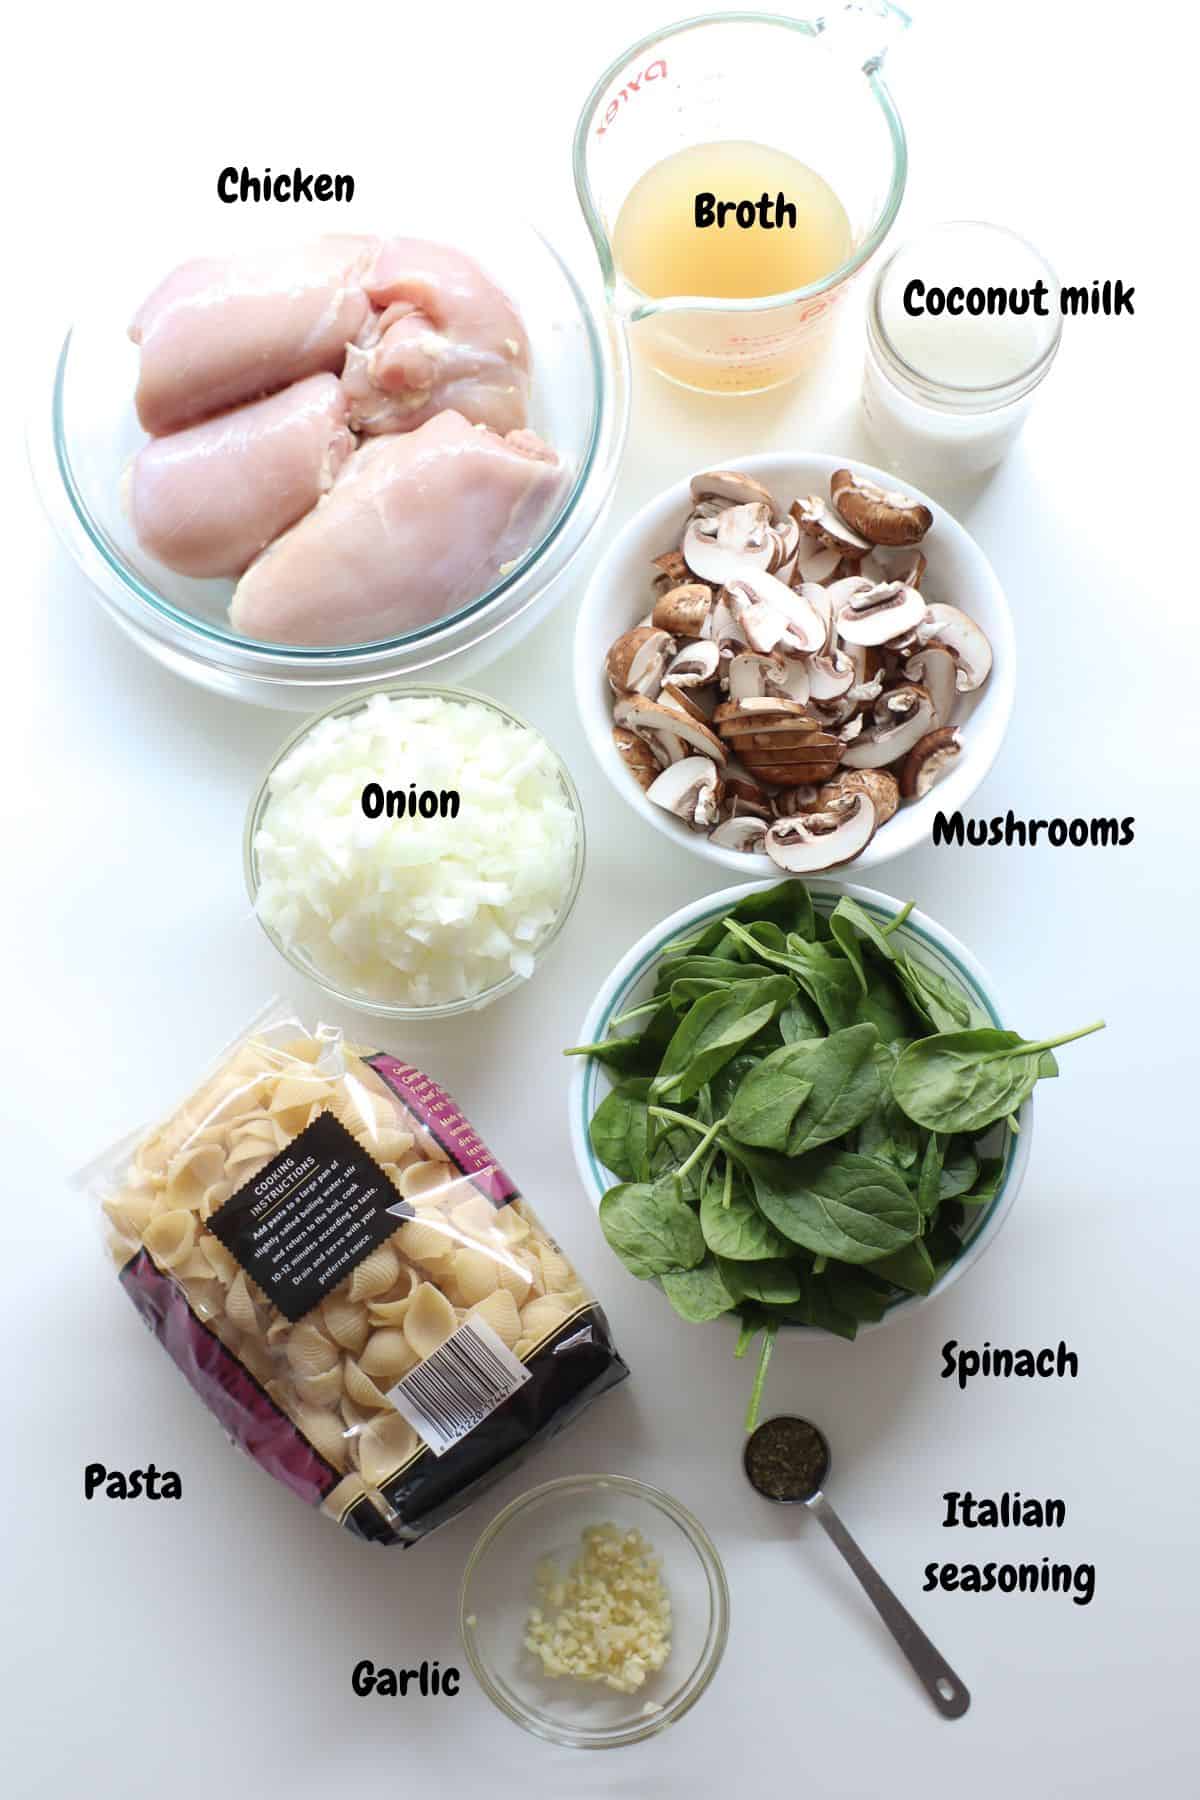 All the ingredients laid out on a white background.